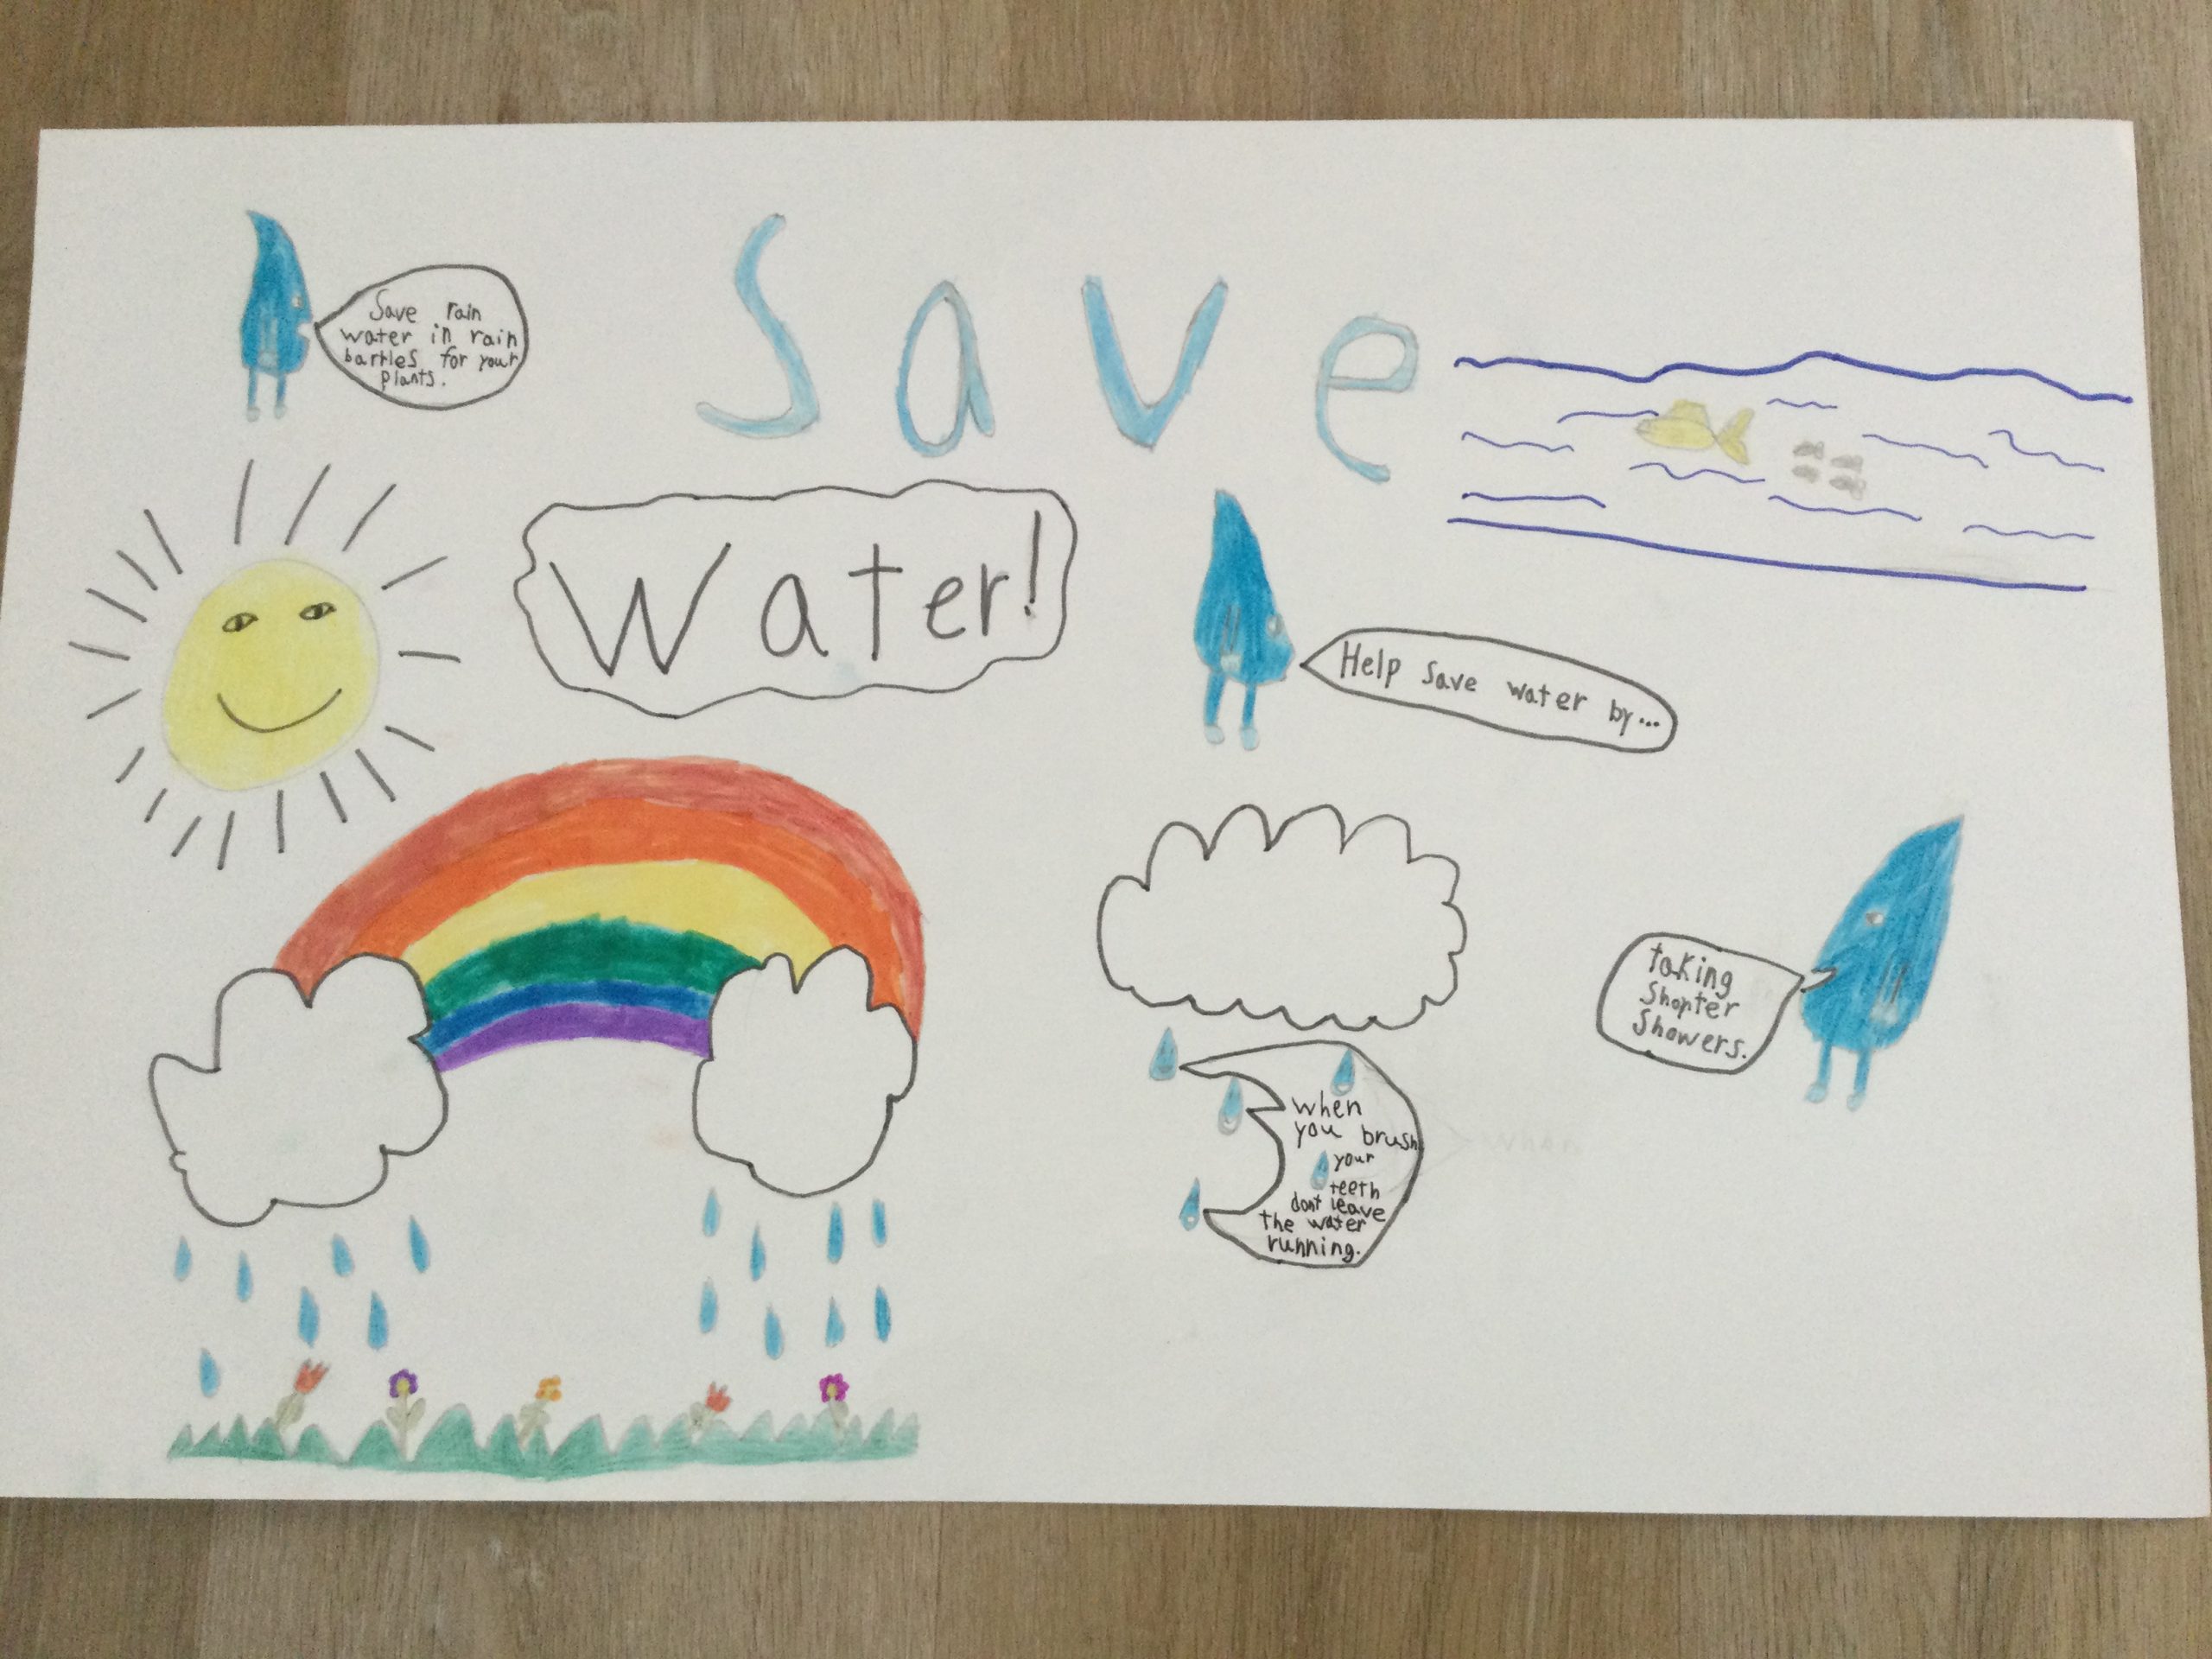 Water conservation poster winners 2022 - Encinitas Advocate